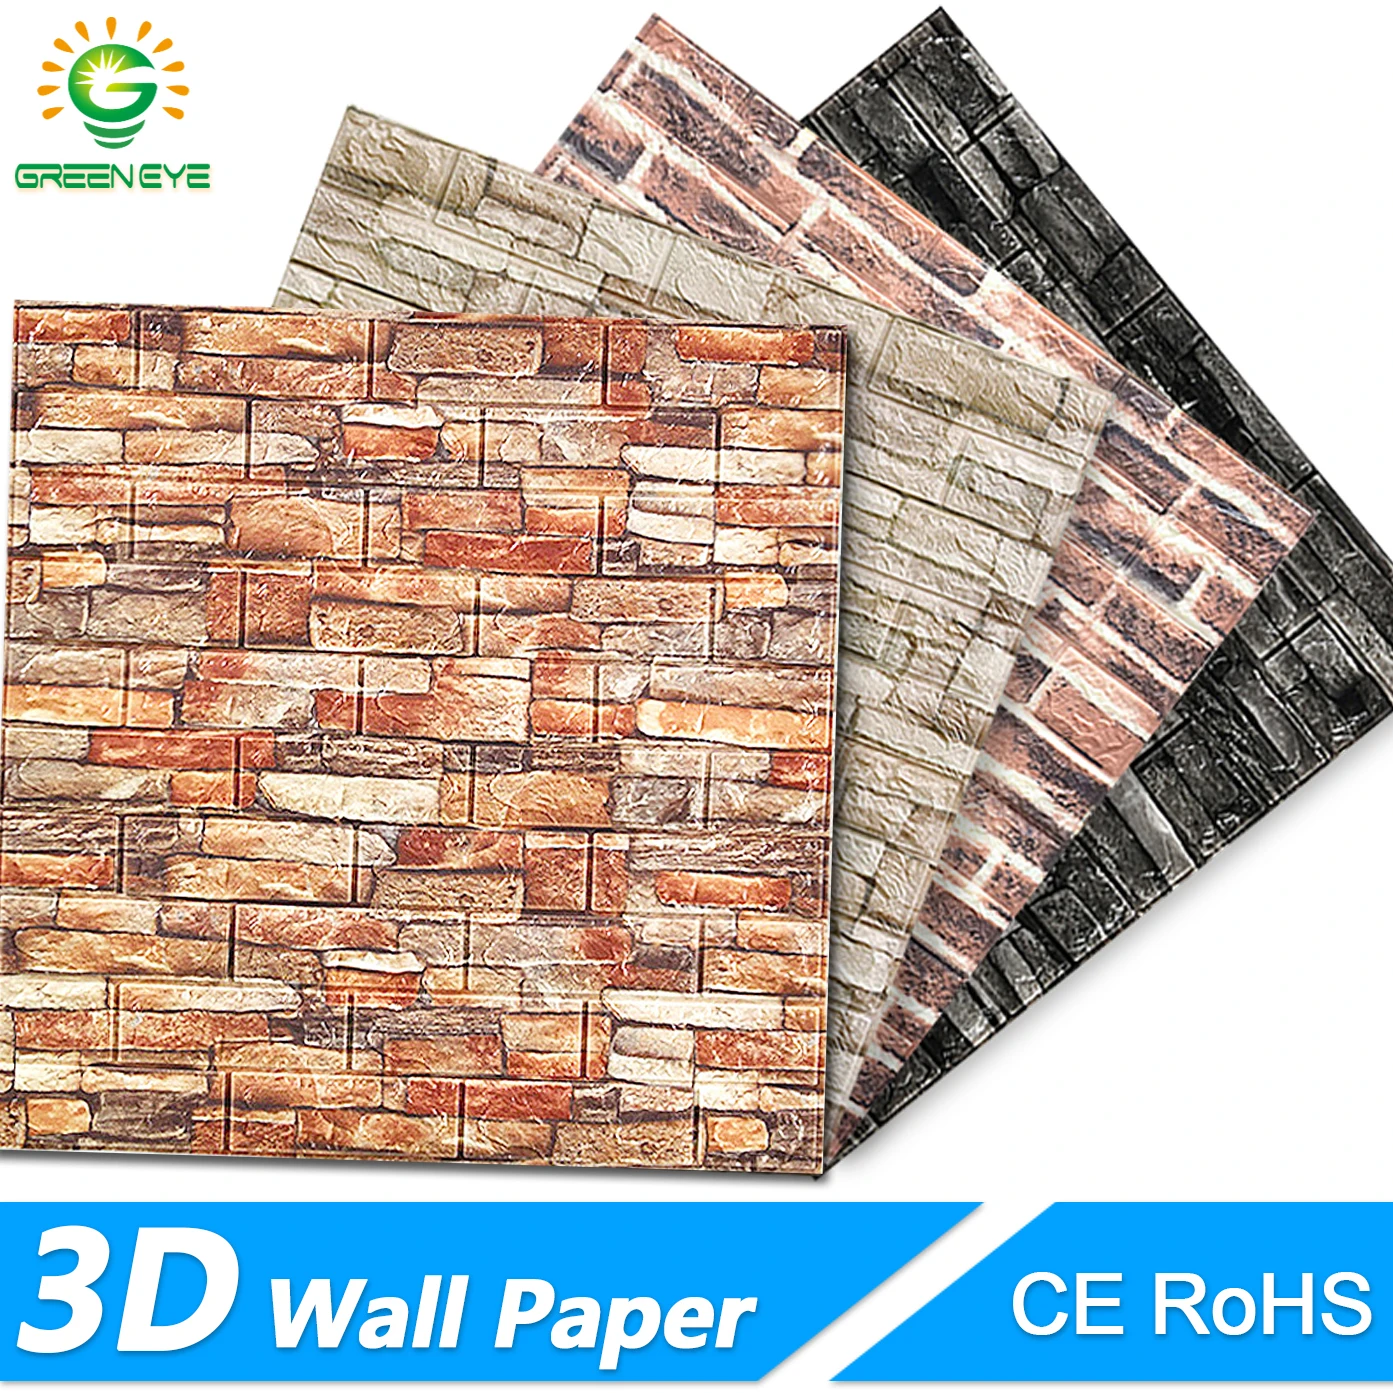 

3D Wall paper Marble Brick Peel and Self-Adhesive Wall Stickers Waterproof DIY Kitchen Bathroom Home Wall Stick PVC Tiles Panel